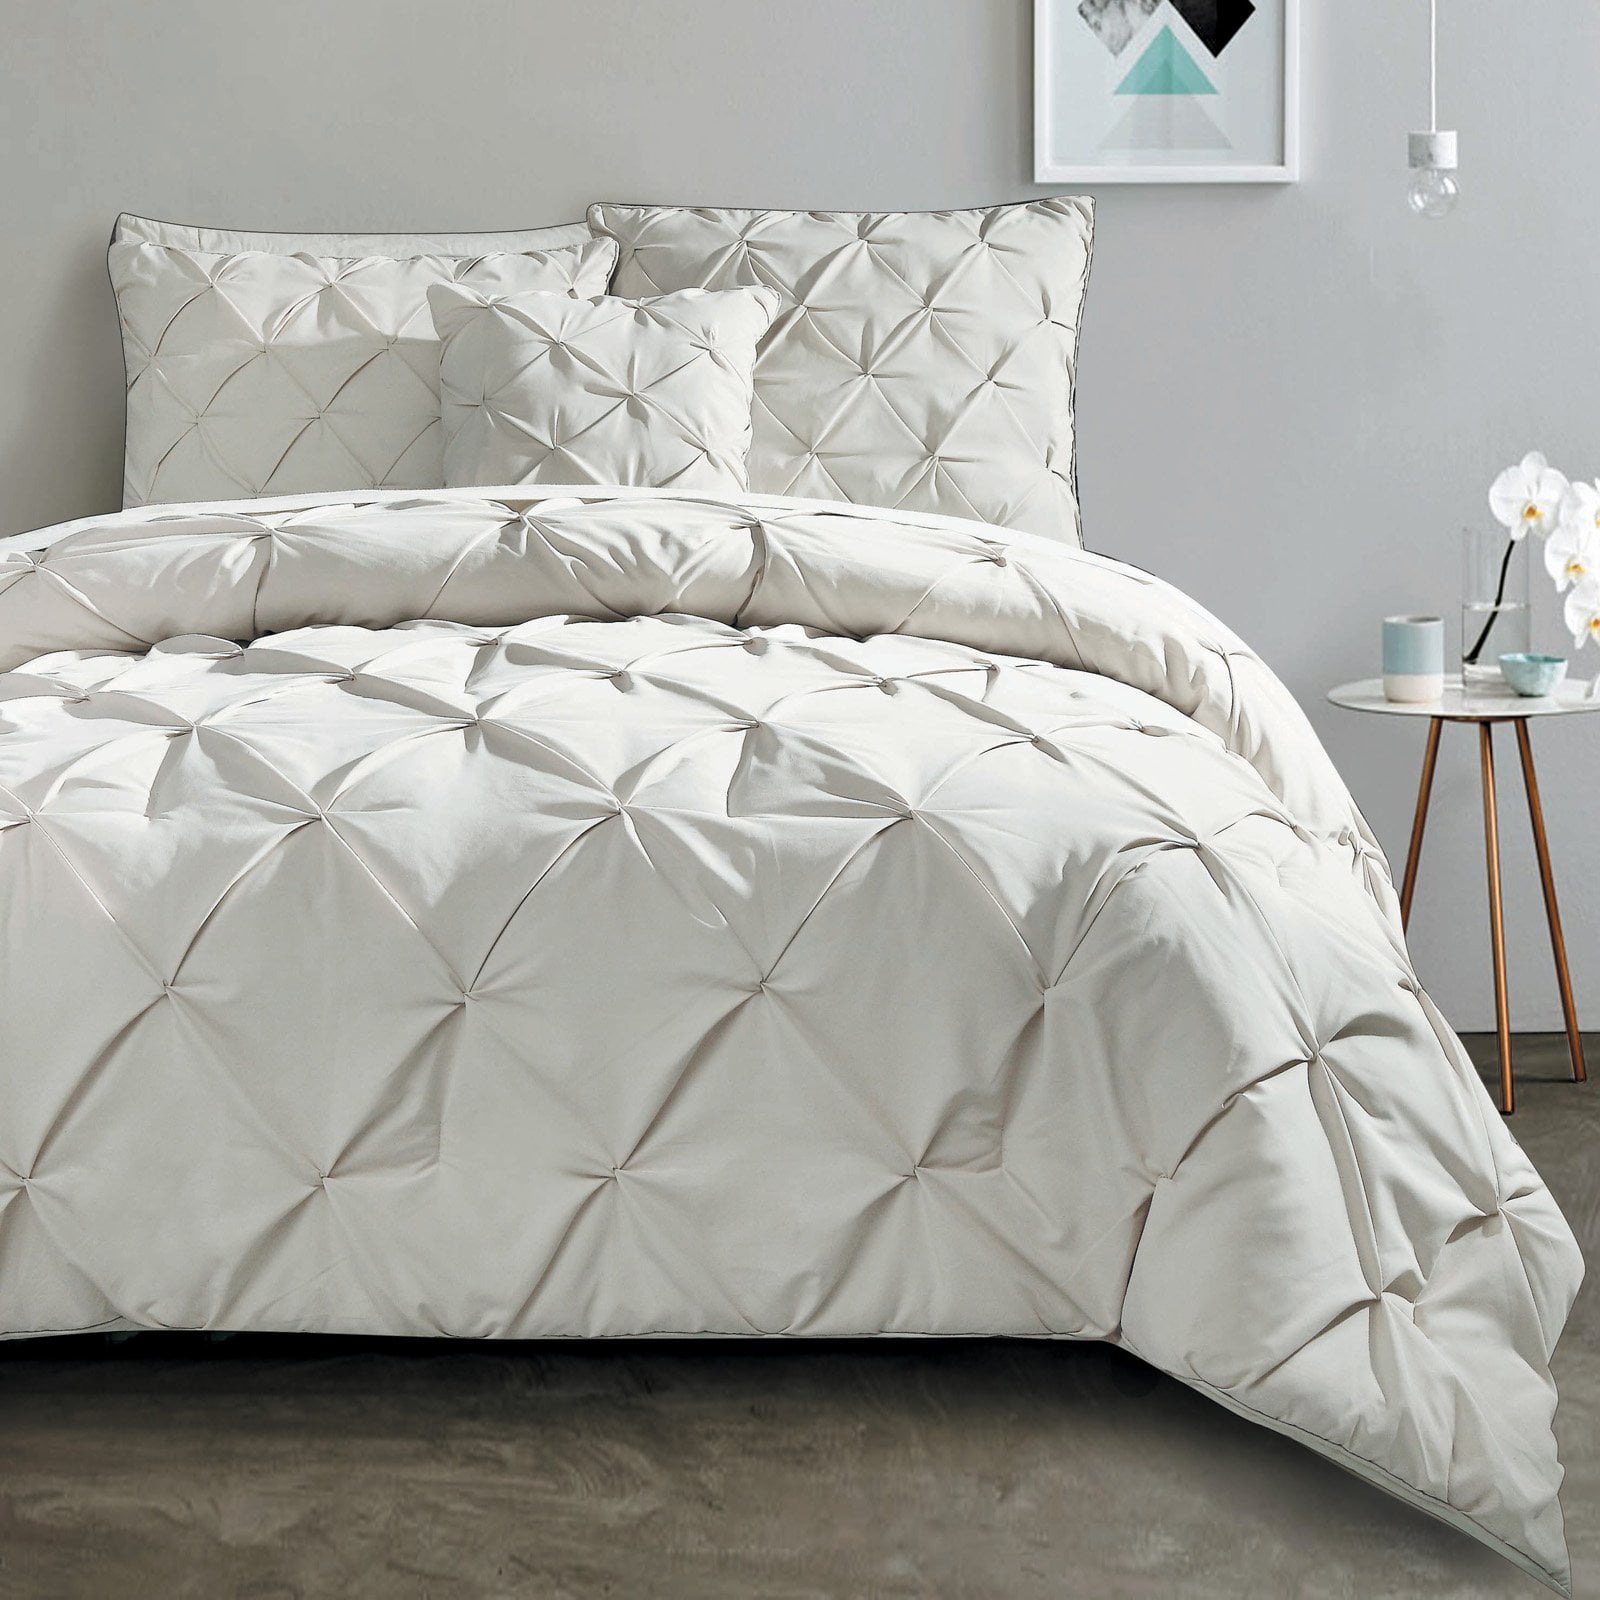 VCNY Home Carmen 4Piece Pintuck Textured Bedding Comforter Set, Multiple Colors Available